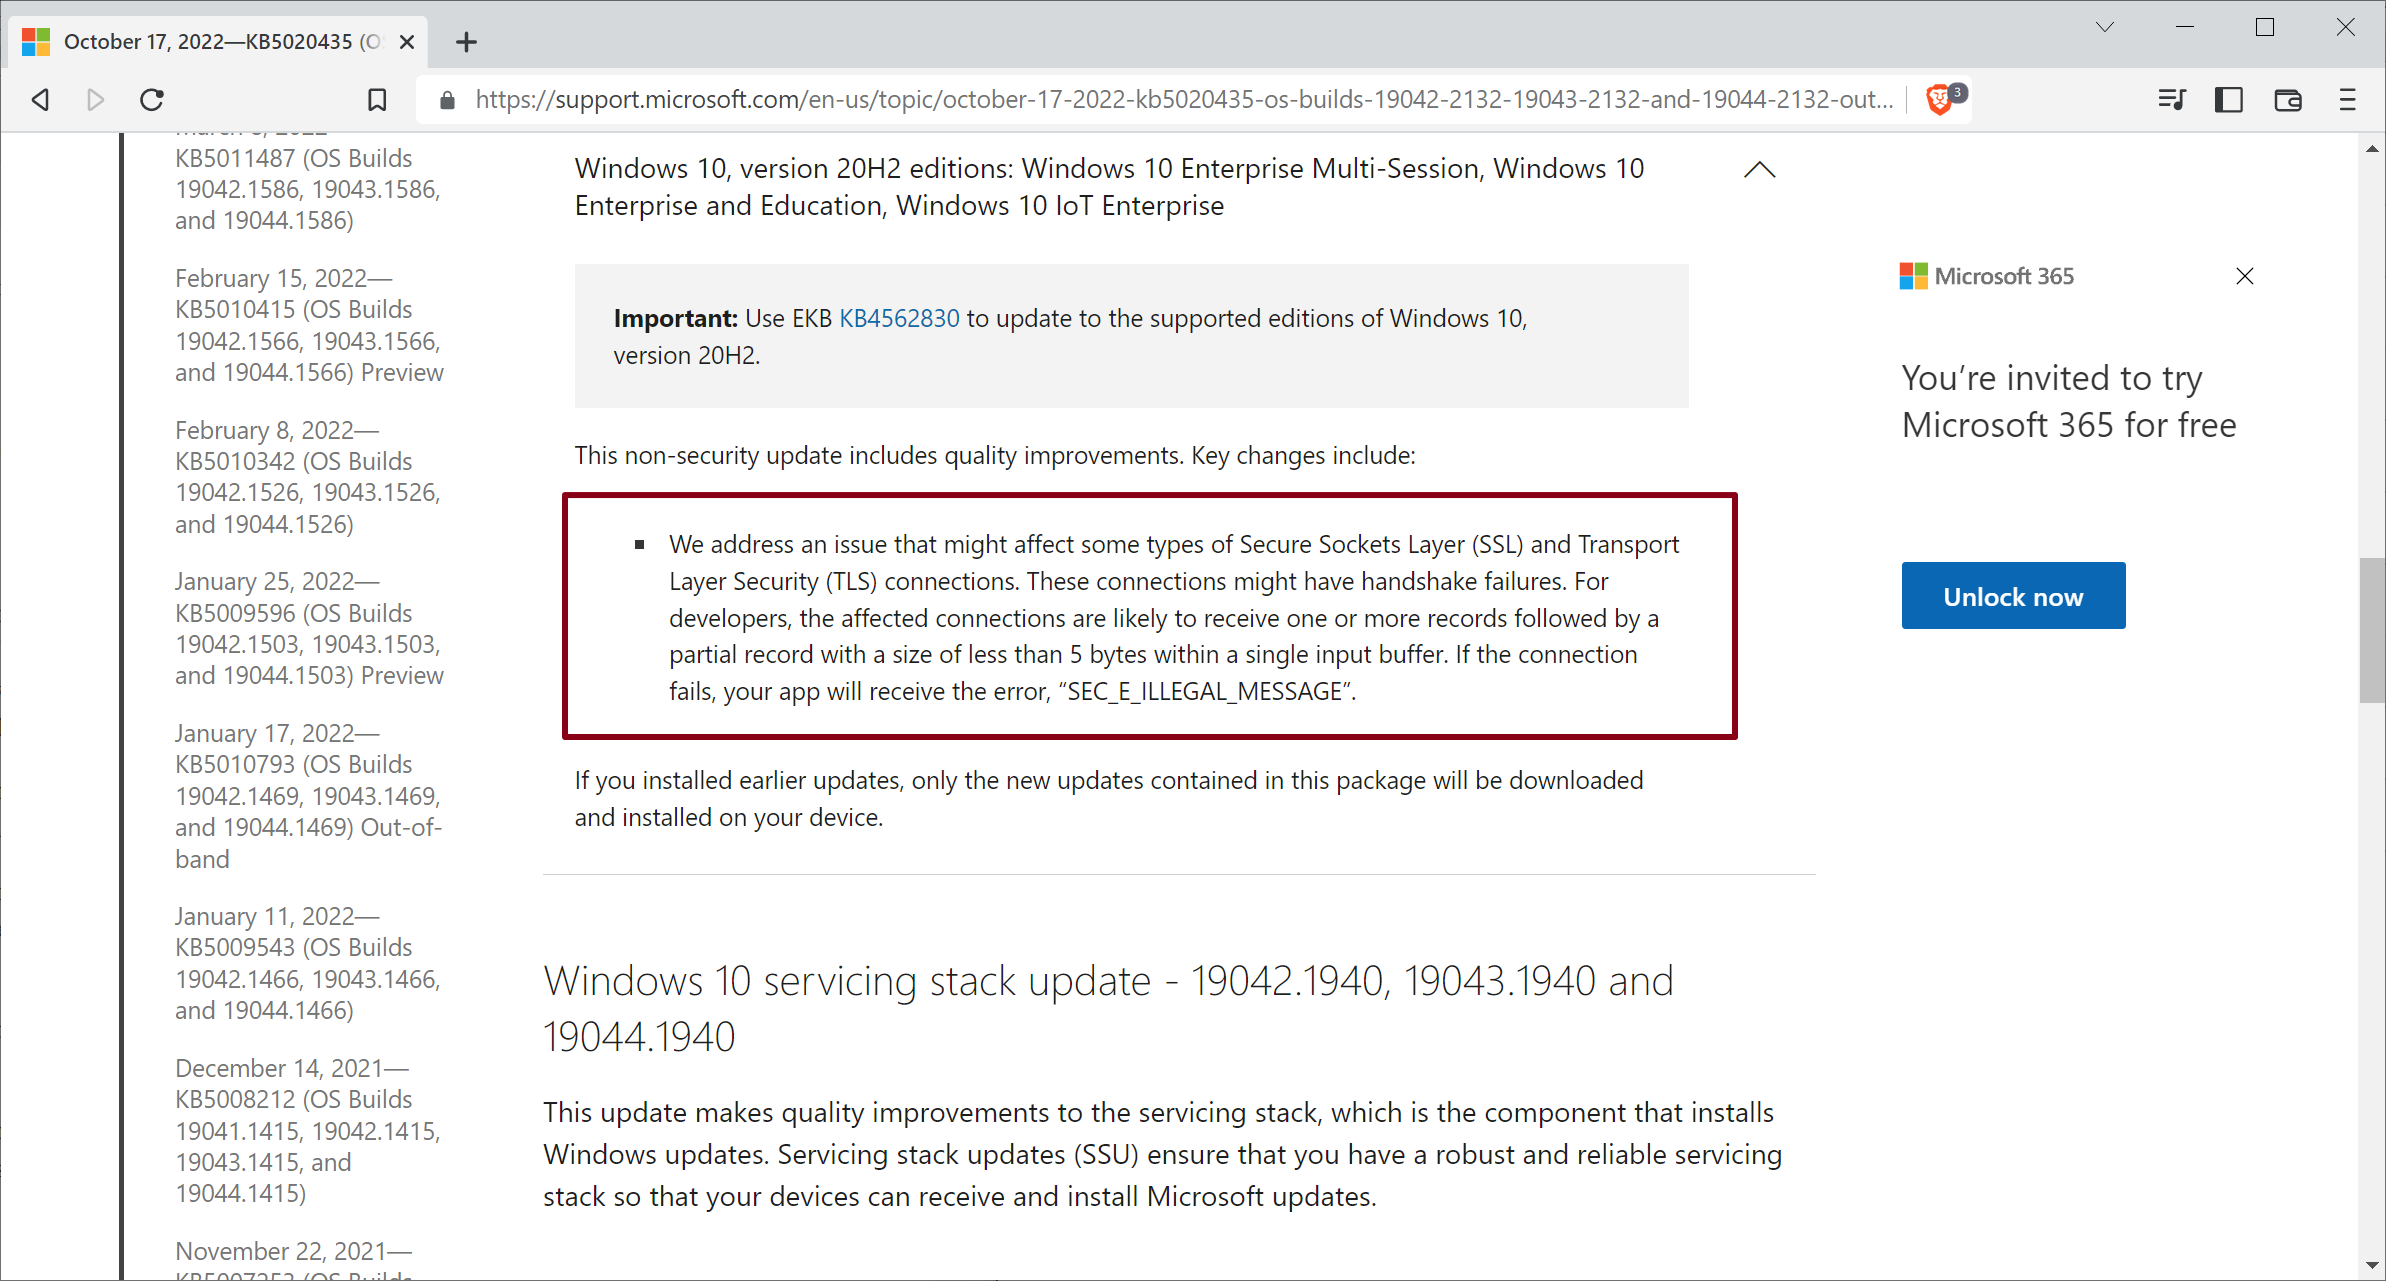 Windows 10 out-of-band update KB5020435 fixes connectivity issues